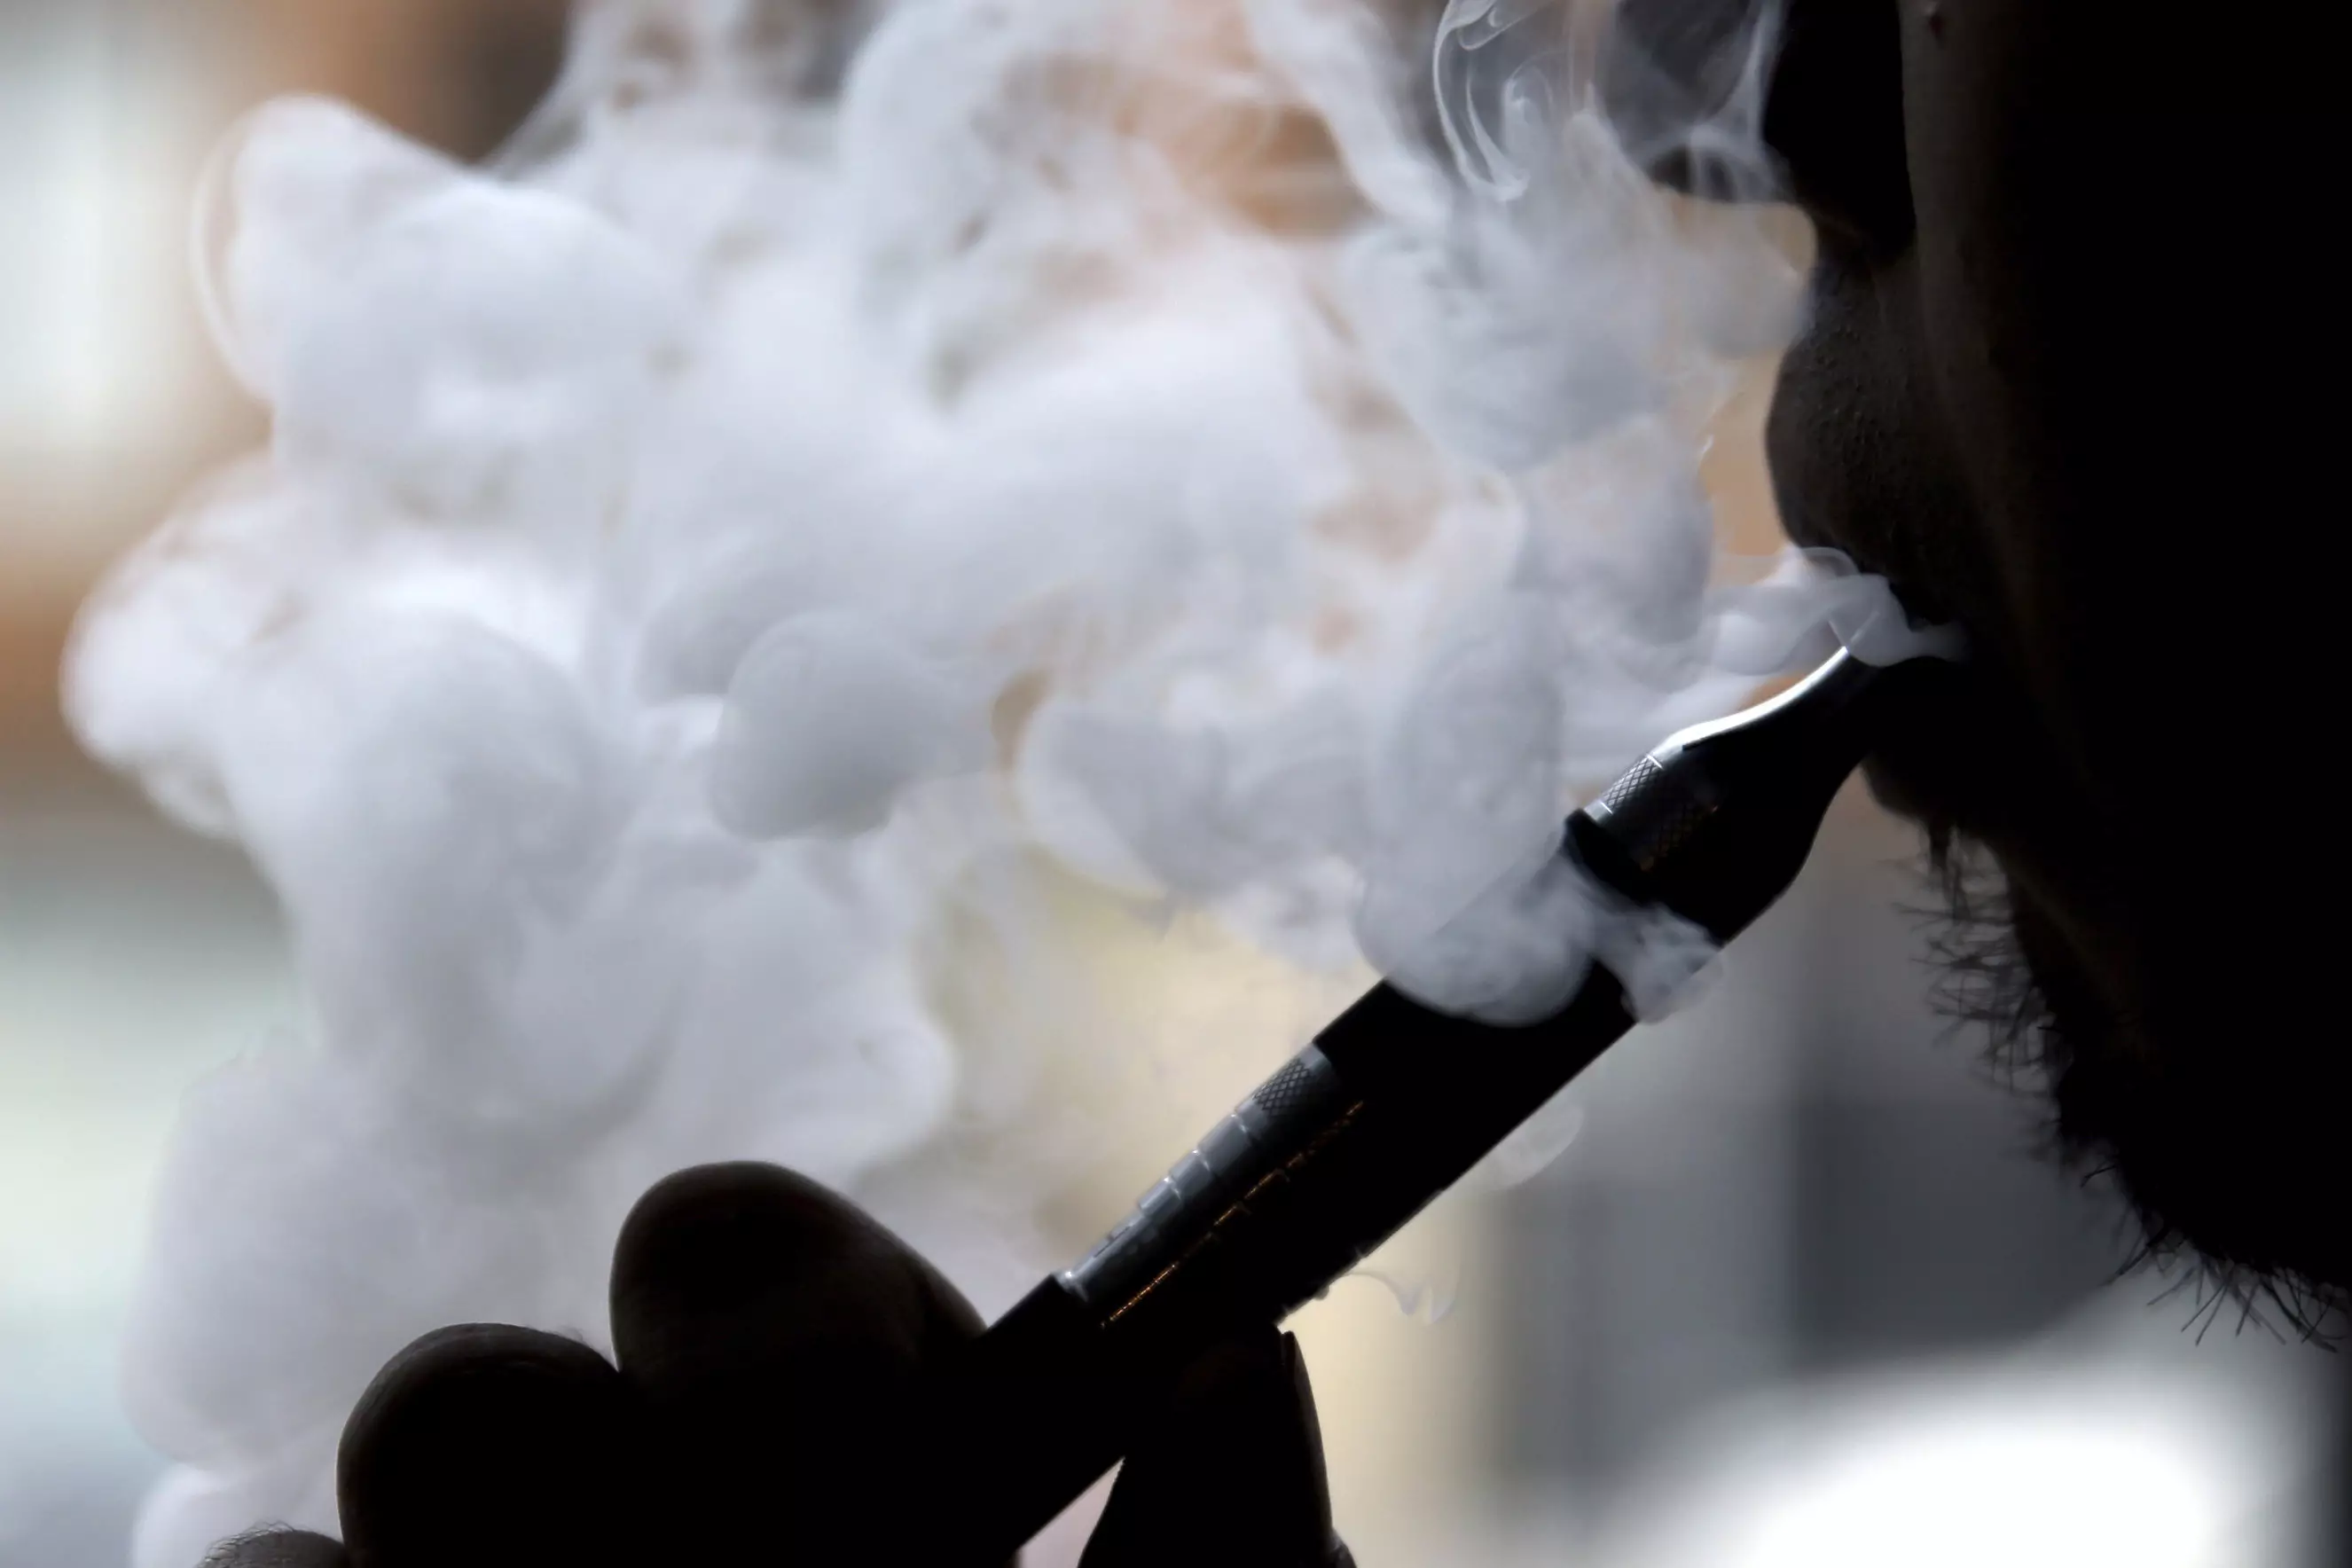 Michigan has become the first US state to ban flavored e-cigarette liquids.